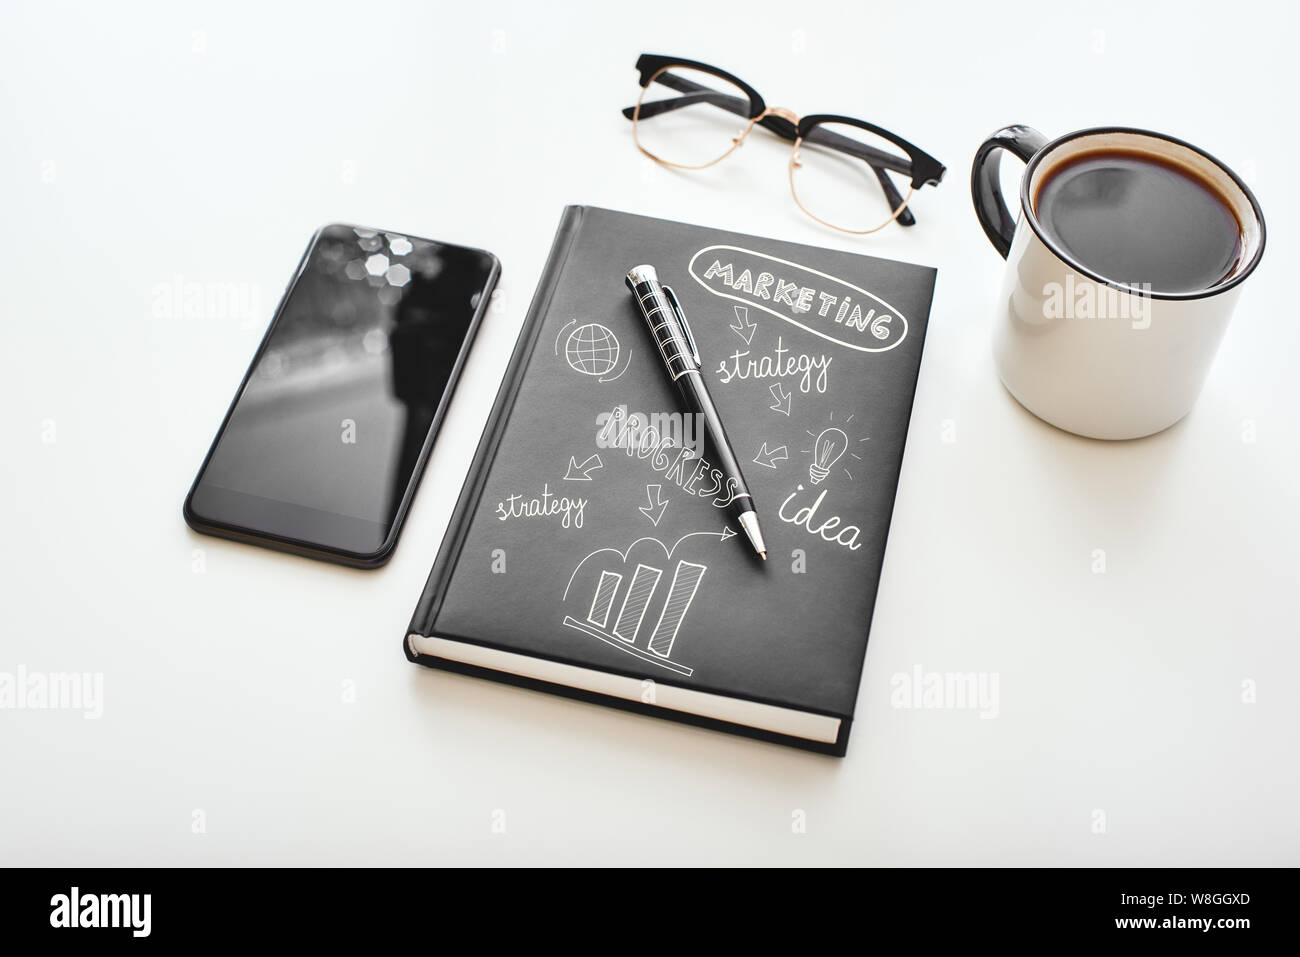 Isolated cup of coffee, smartphone, pen, notebook and glasses lying on a white desk. Hand drawn doodle illustration on the notebook. Horizontal shot Stock Photo